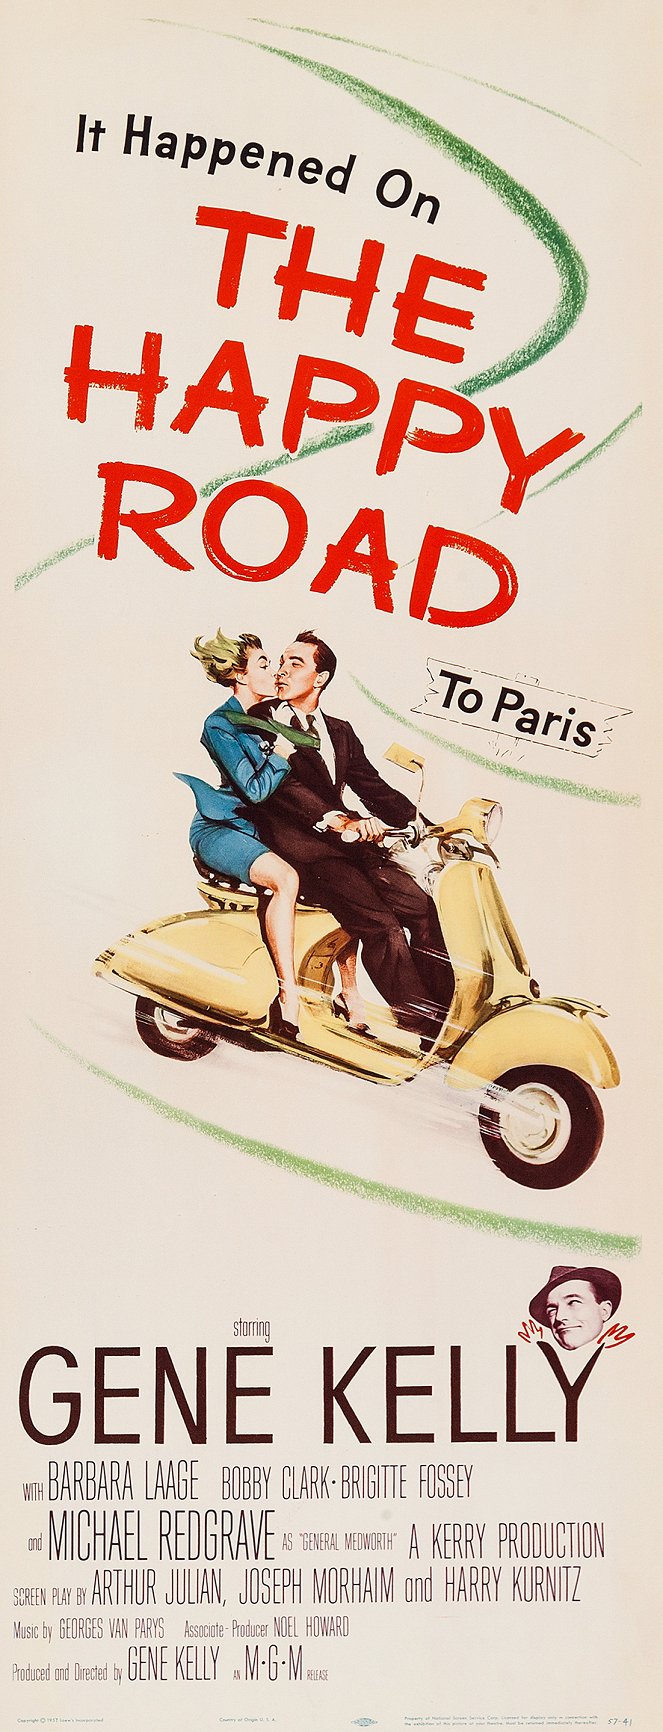 The Happy Road - Posters